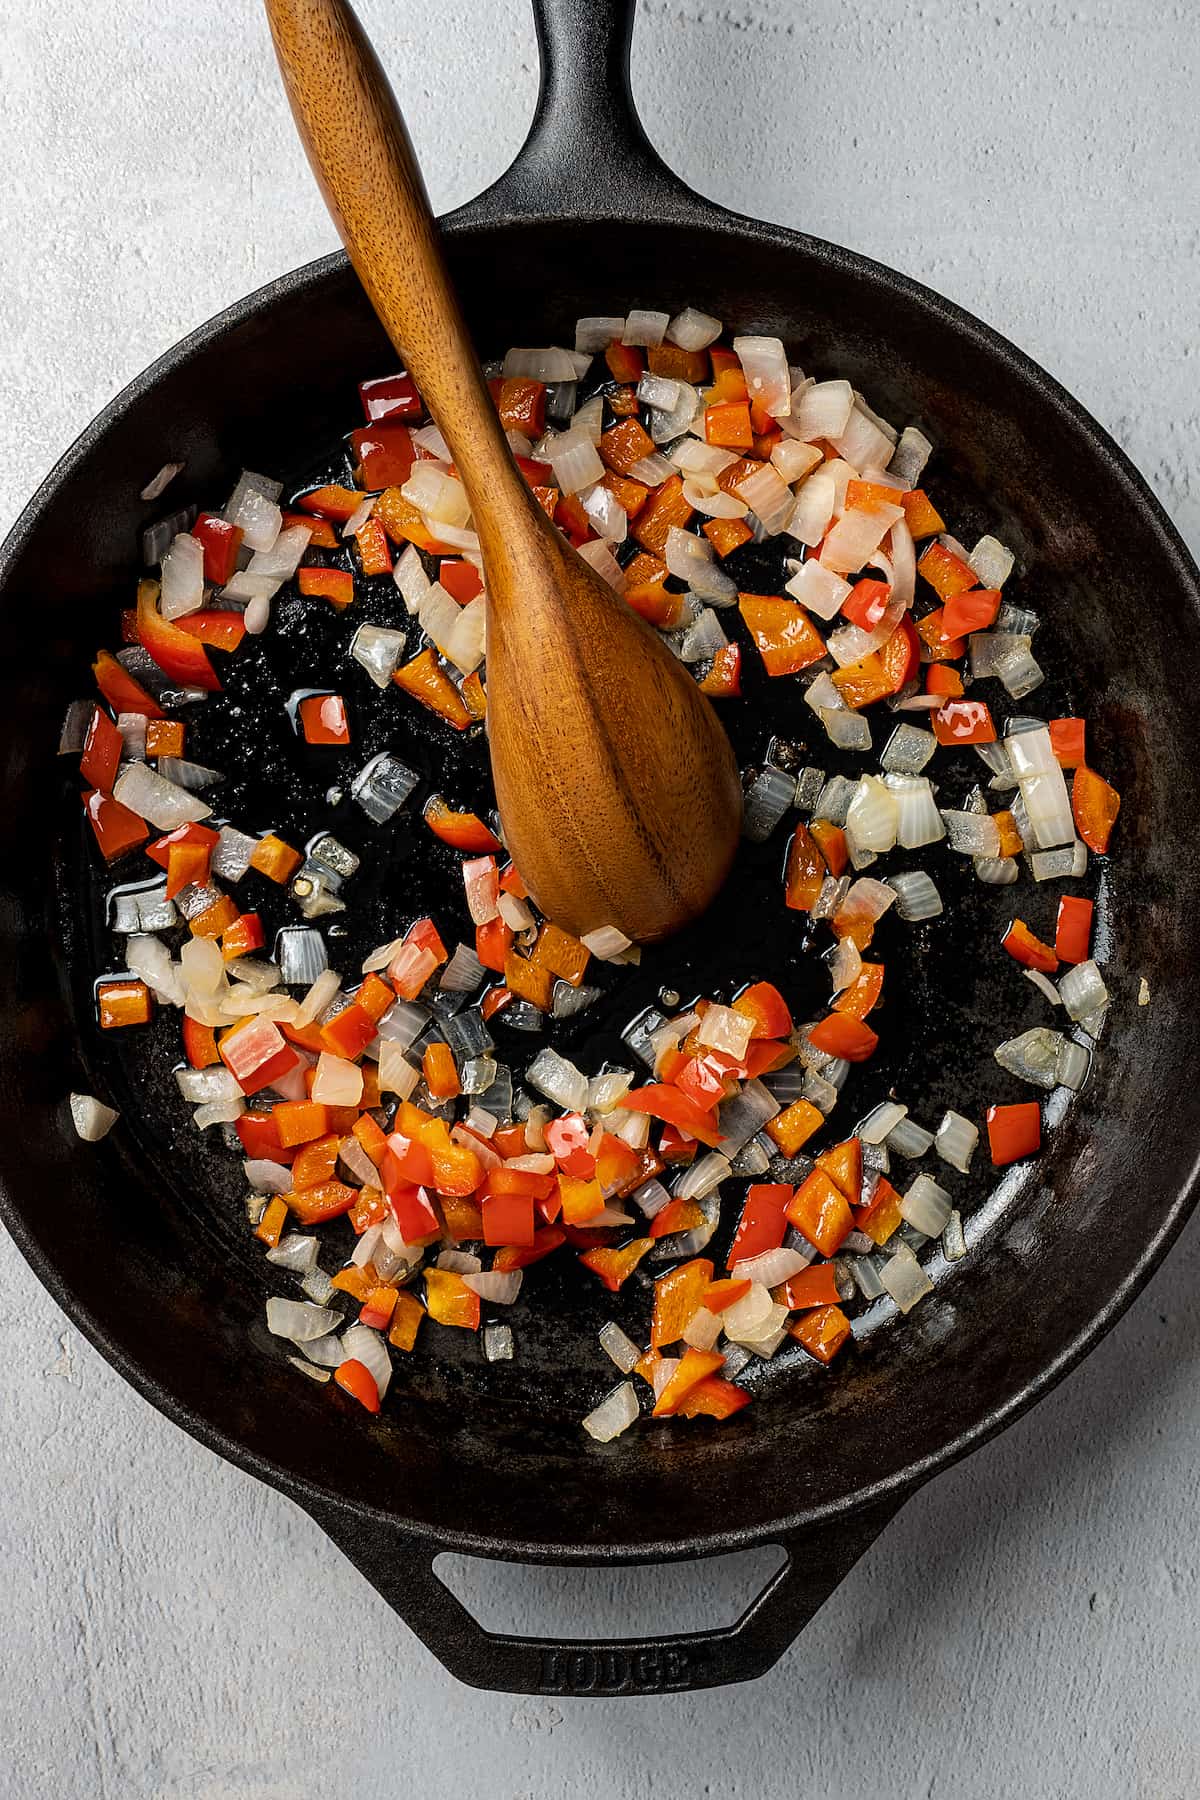 Chopped vegetables cooking in a cast-iron skillet.